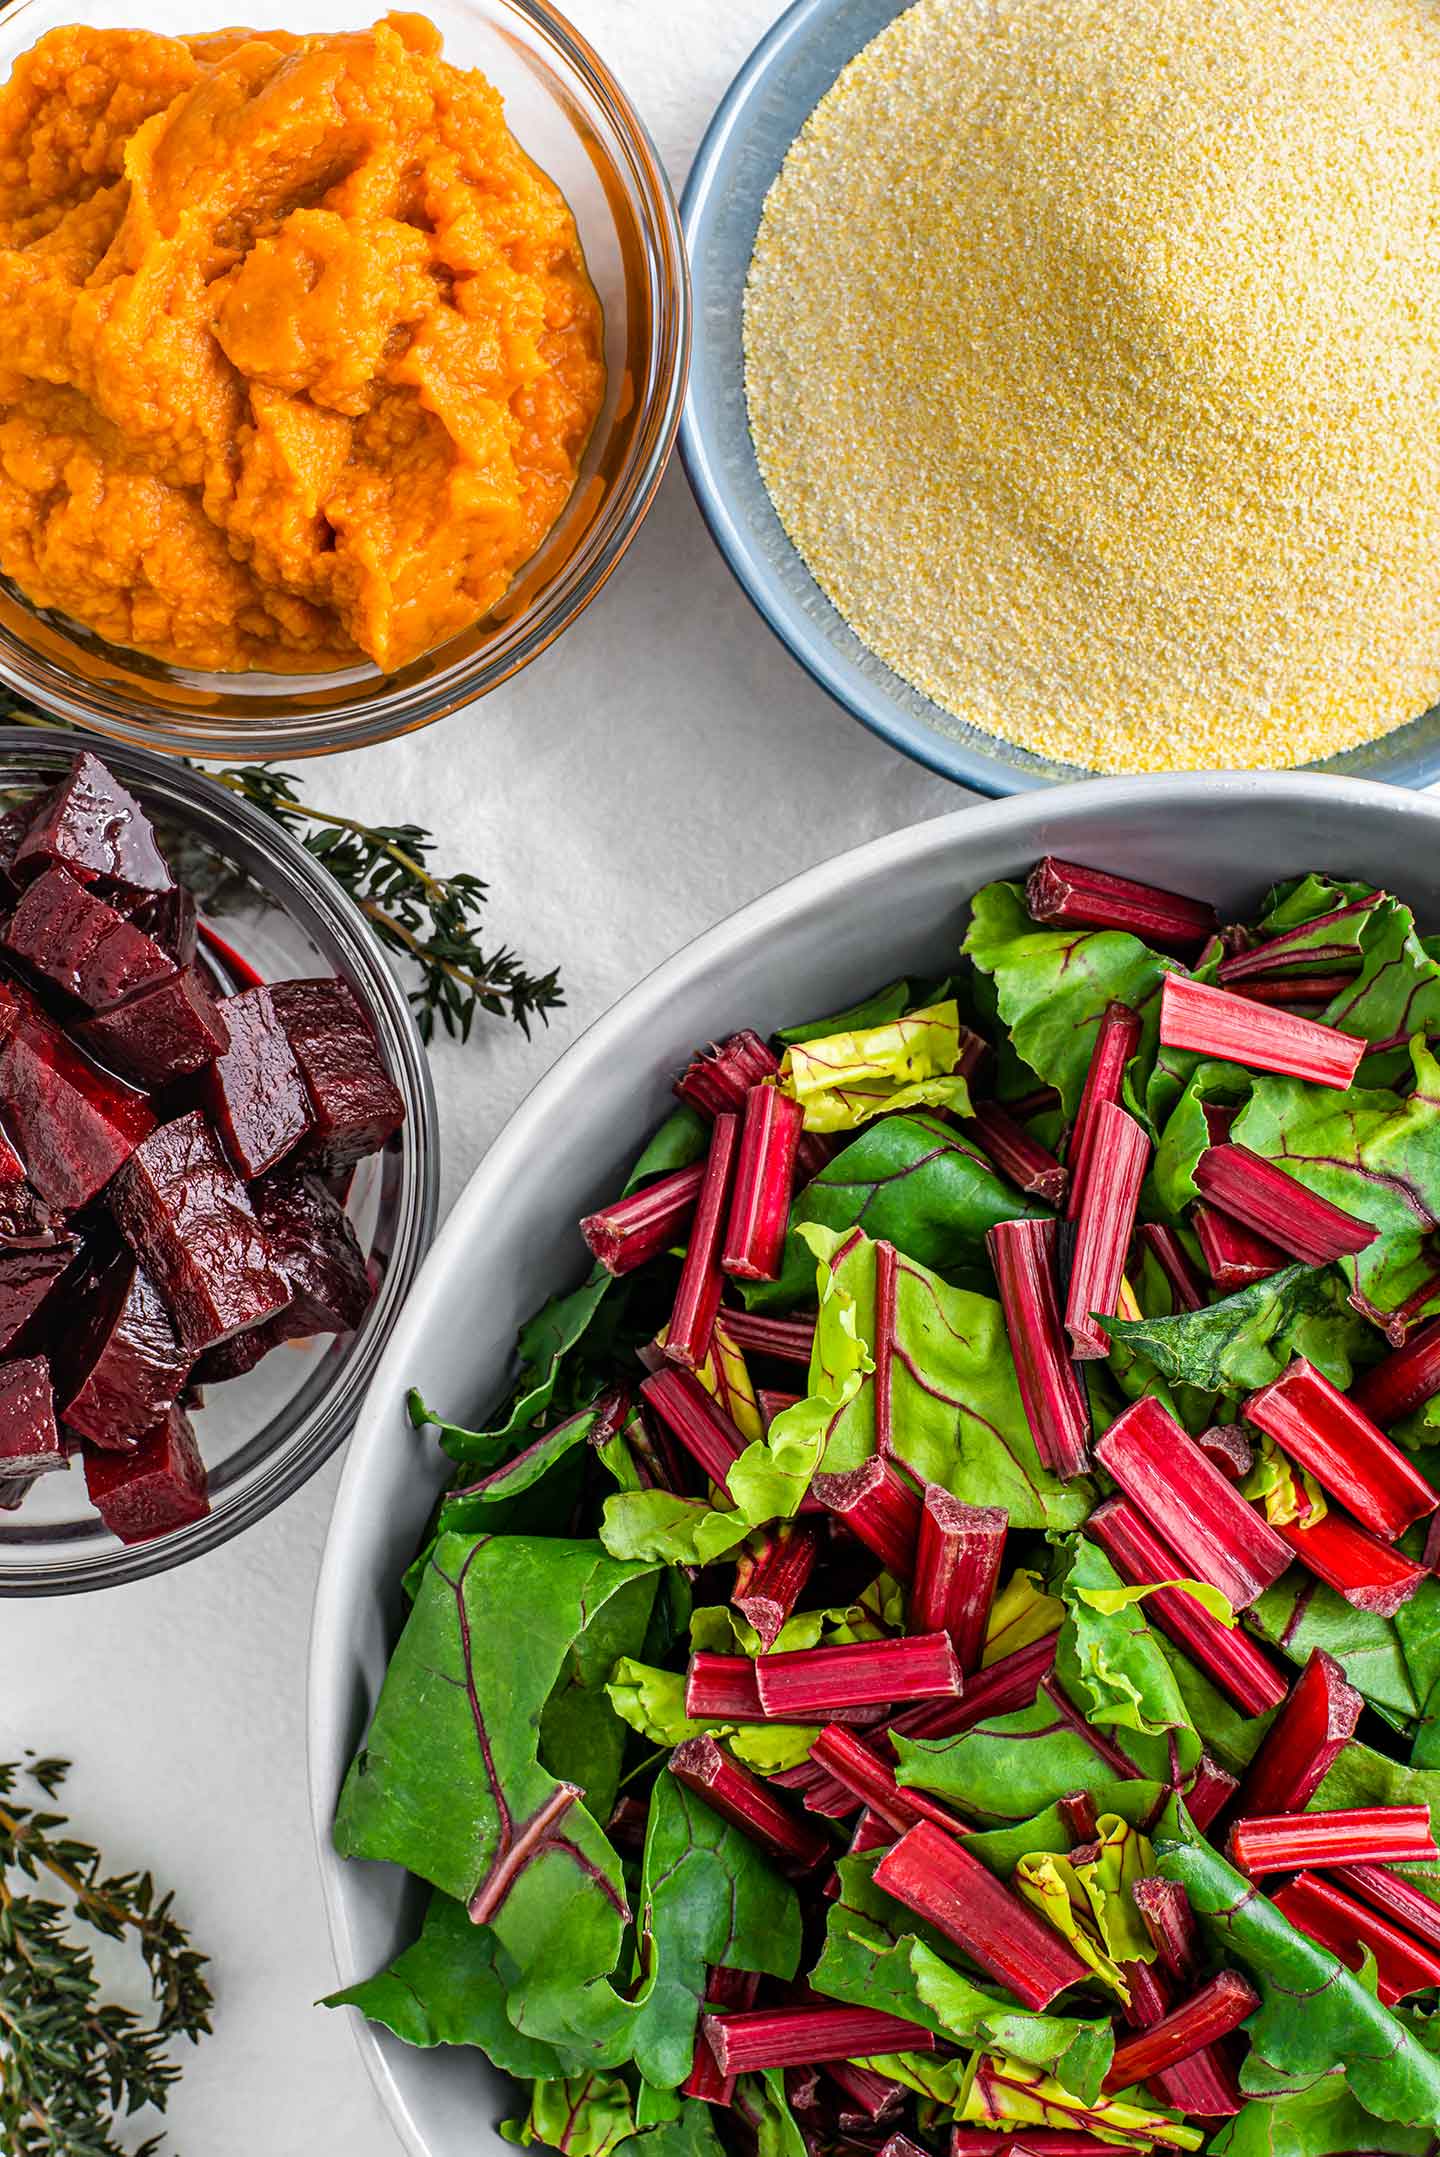 Top down view of ingredients for festive pumpkin beet polenta. Raw beet greens, roasted beets, pumpkin puree, and corneal fill separate dishes on a white tray.